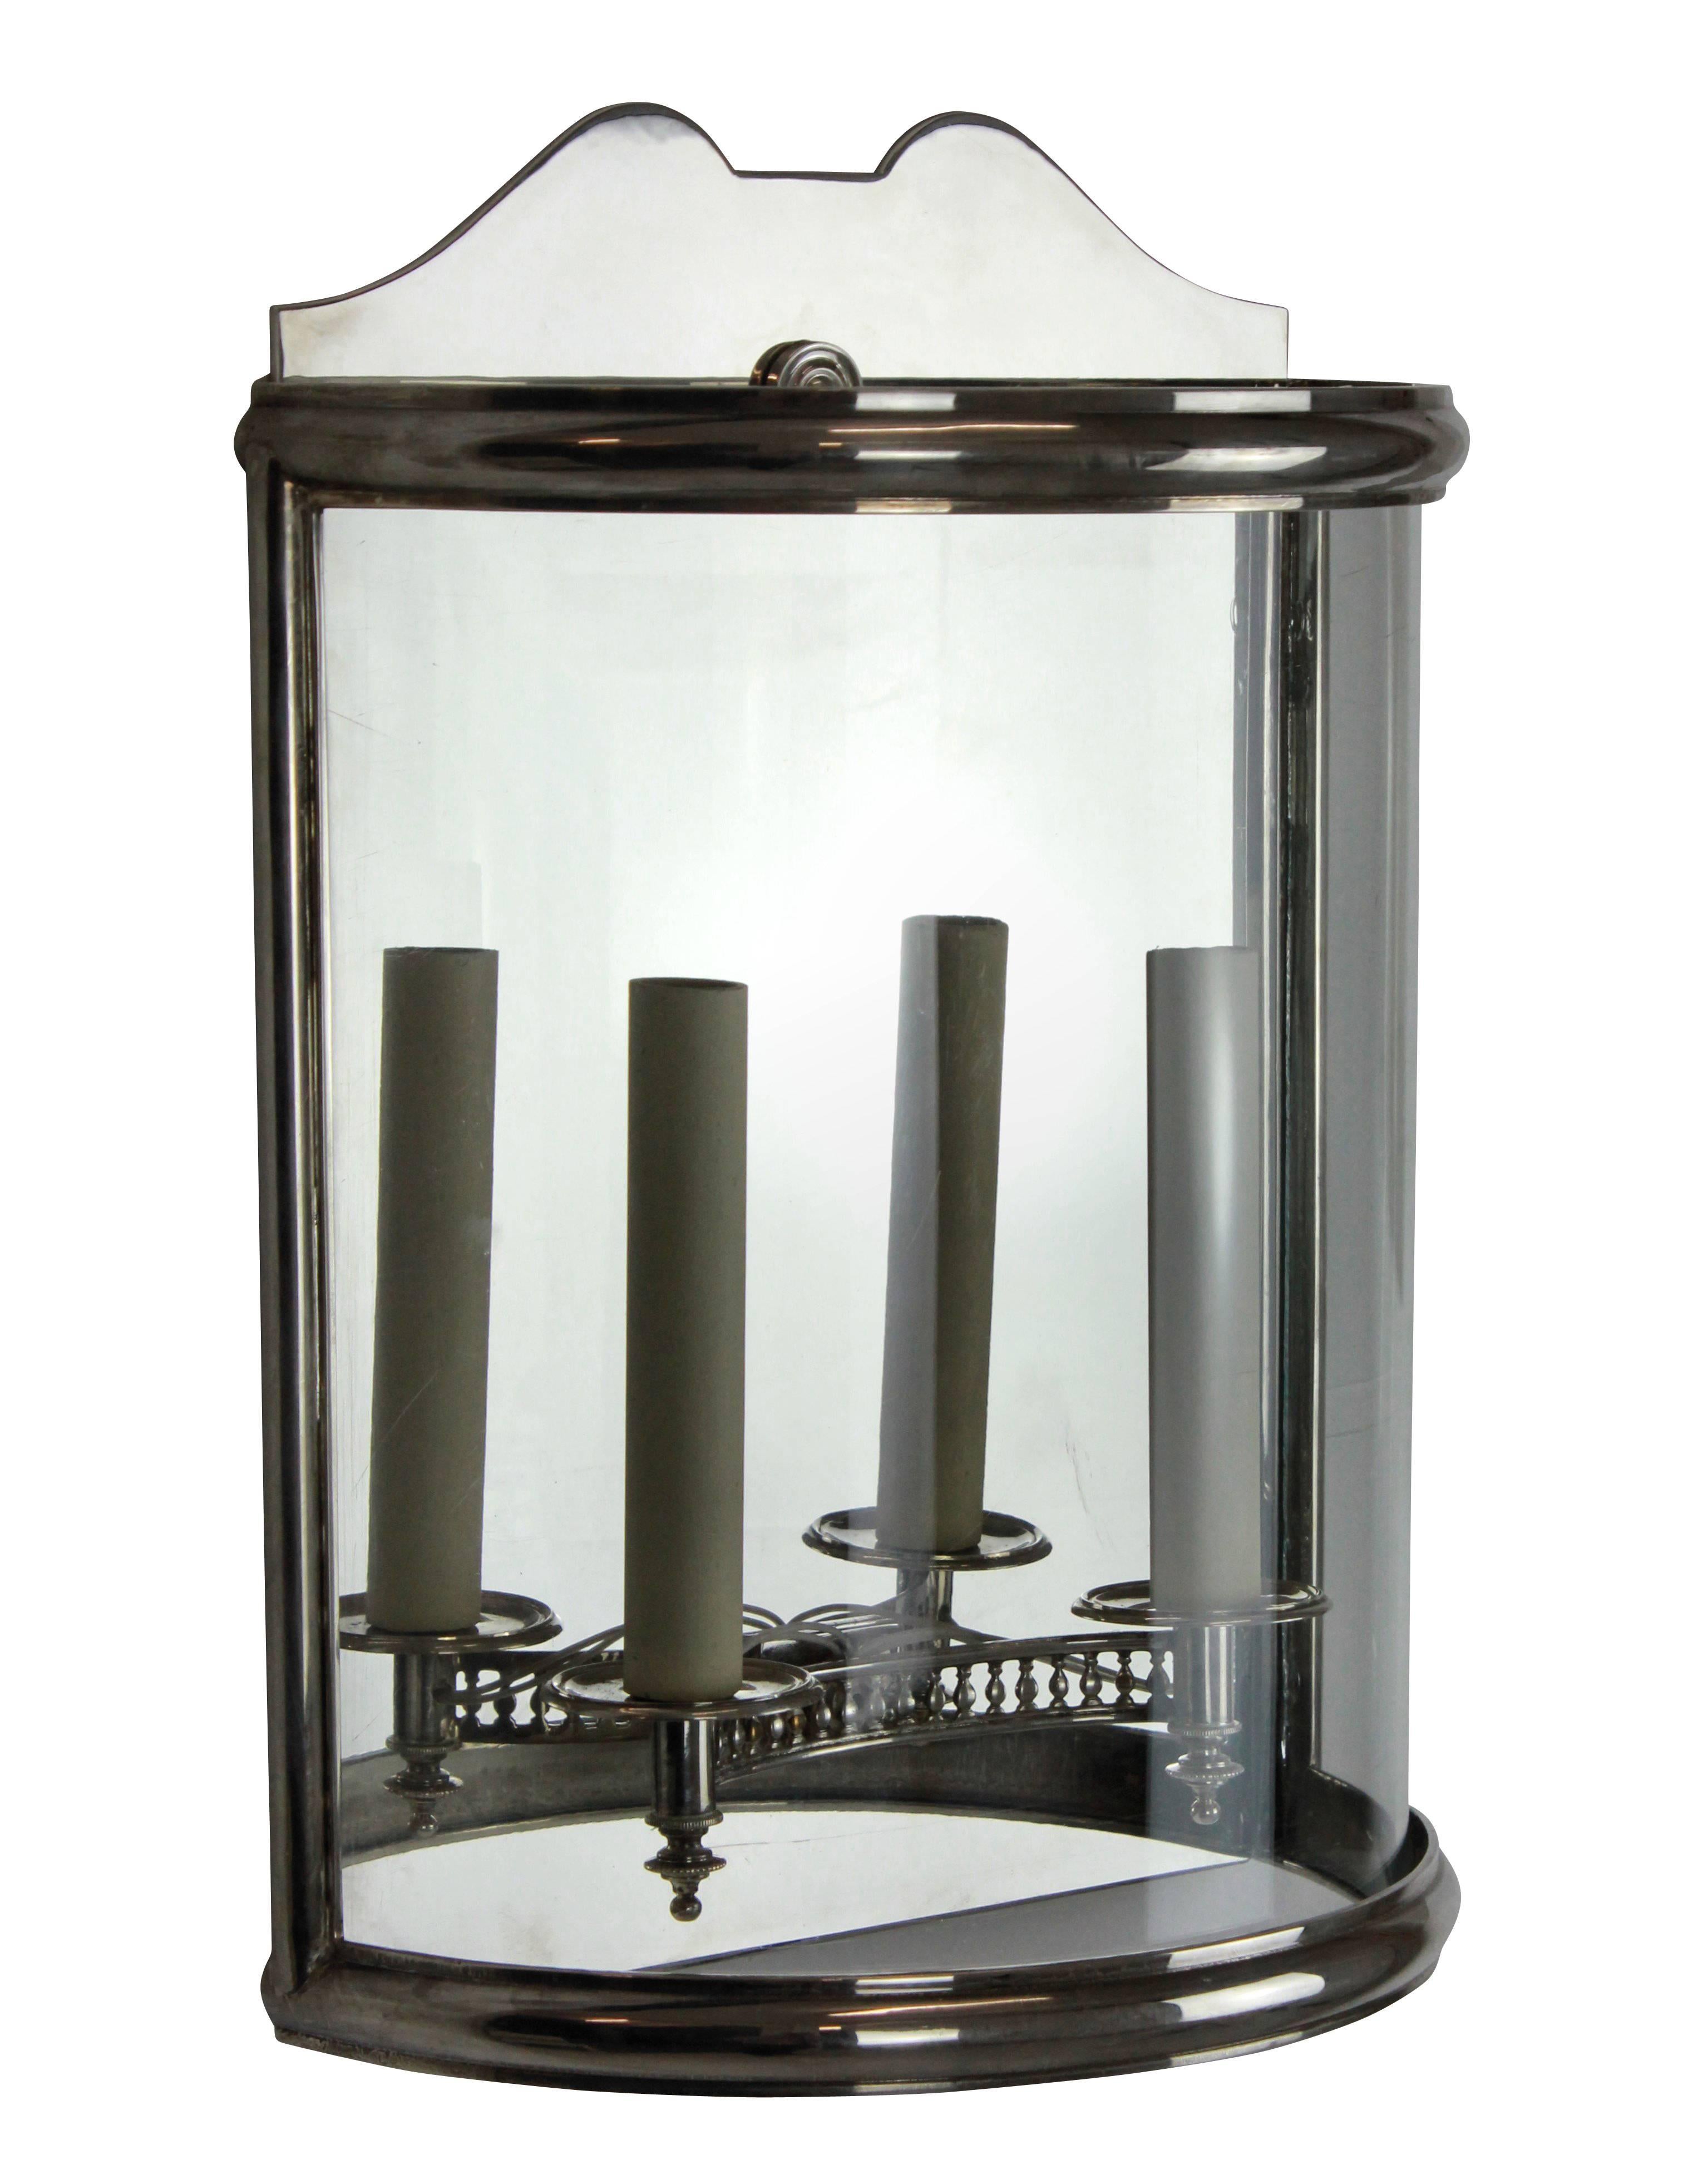 A pair of good quality English demilune wall lanterns in silver plated brass. Of simple Georgian design with a single curved panel of glass.

 